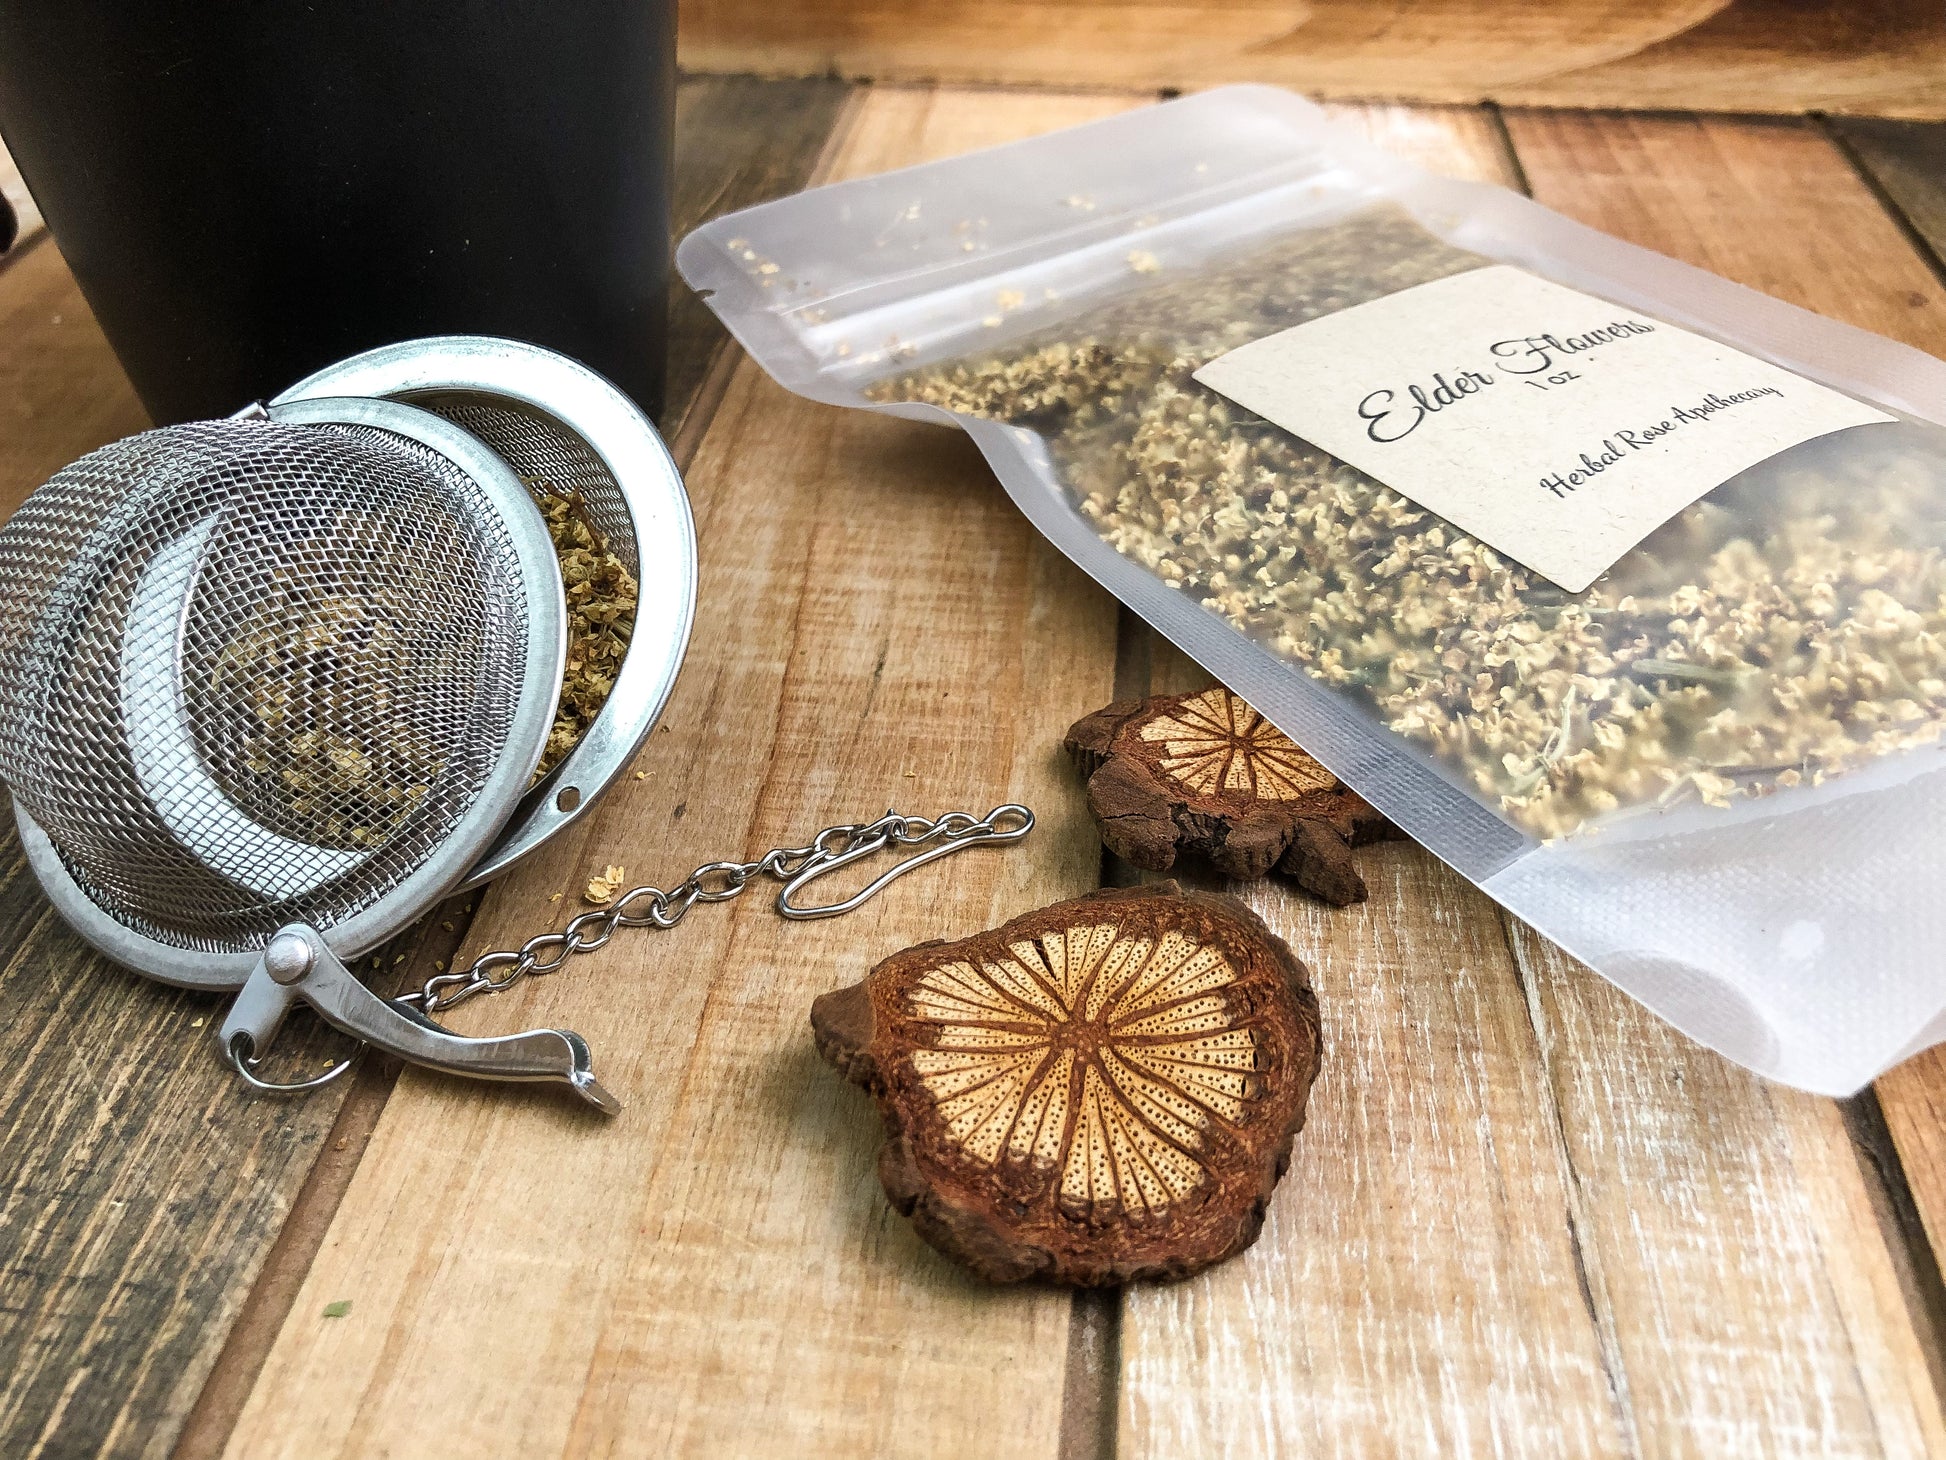 dried elderflowers in a clear bag laying flat next to a black mug and mesh tea strainer, with wooden chips scattered around all on a wooden background